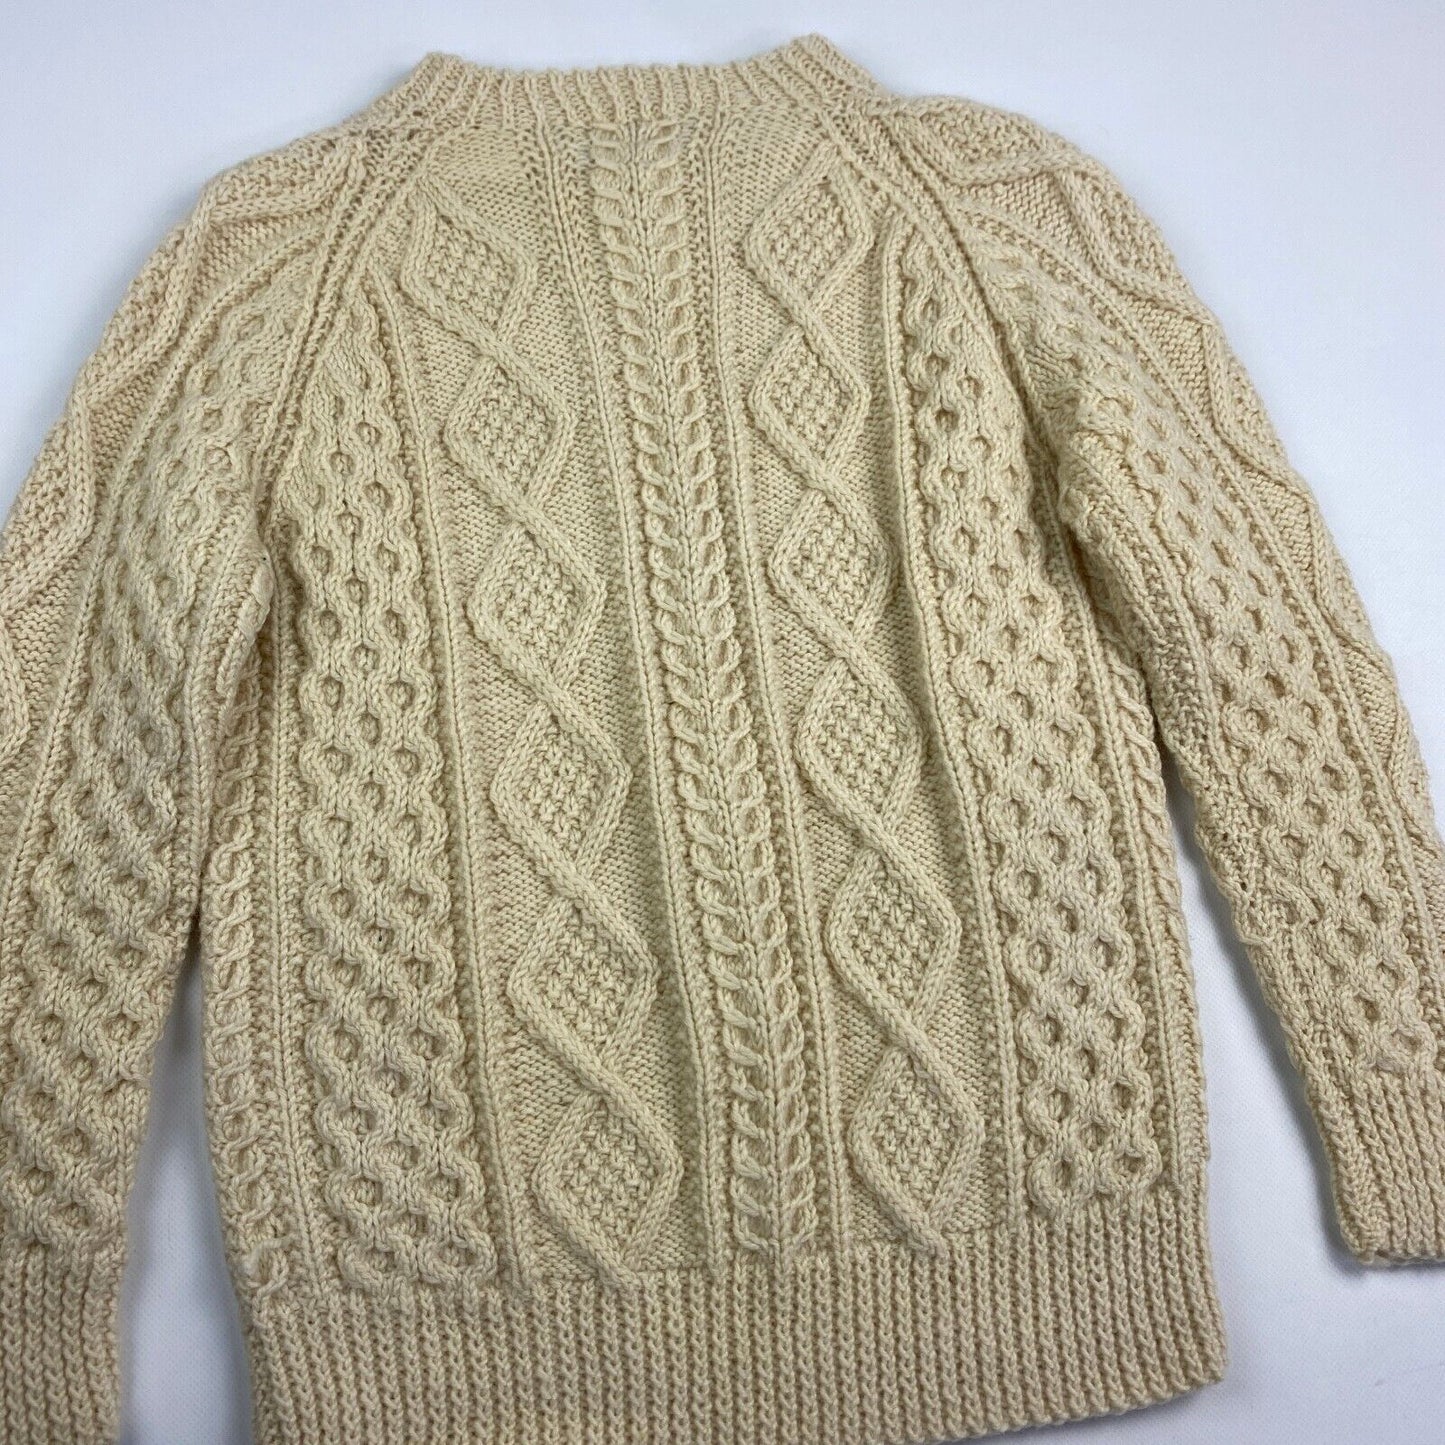 VINTAGE 80s Heavy Cream Wool Cable Knit Sweater sz Small Men